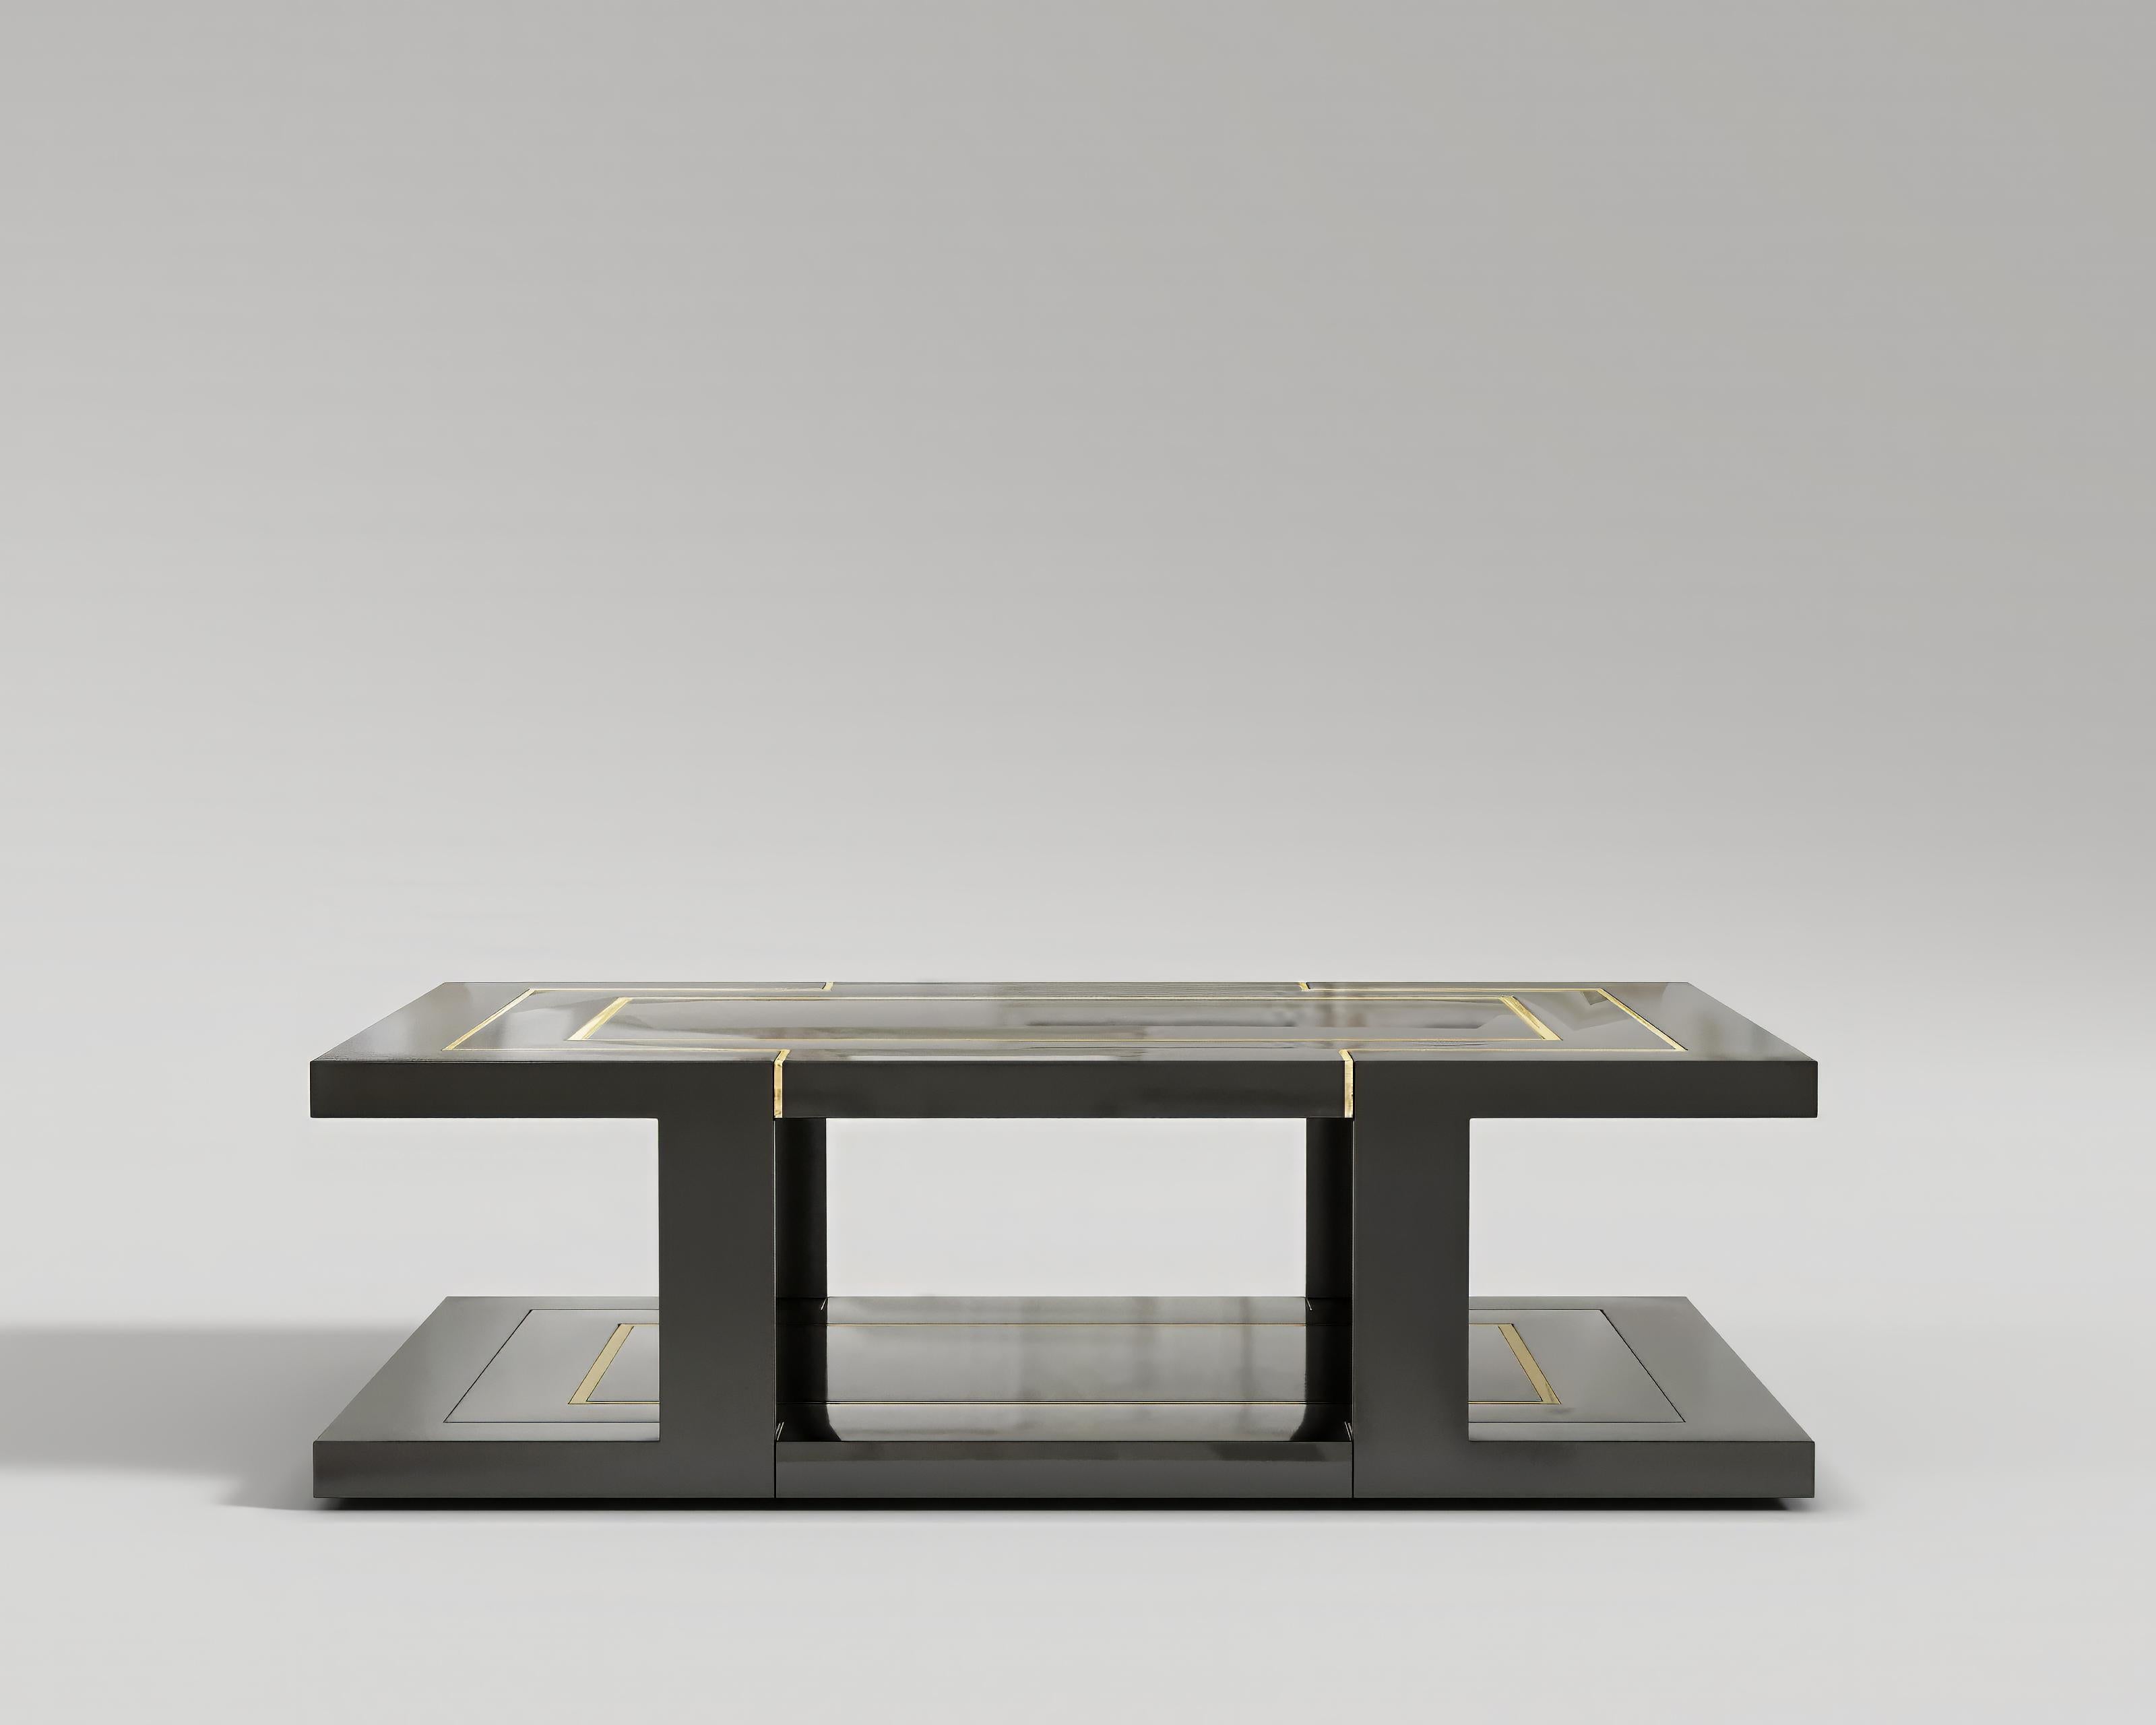 Deco Coffee Table

The Deco Coffee Table is a spectacular piece that brings together the elegance and sophistication to the hightest level. It adds the style to every living space. Manufacturing a masterpiece inspired by art deco design is no doubt